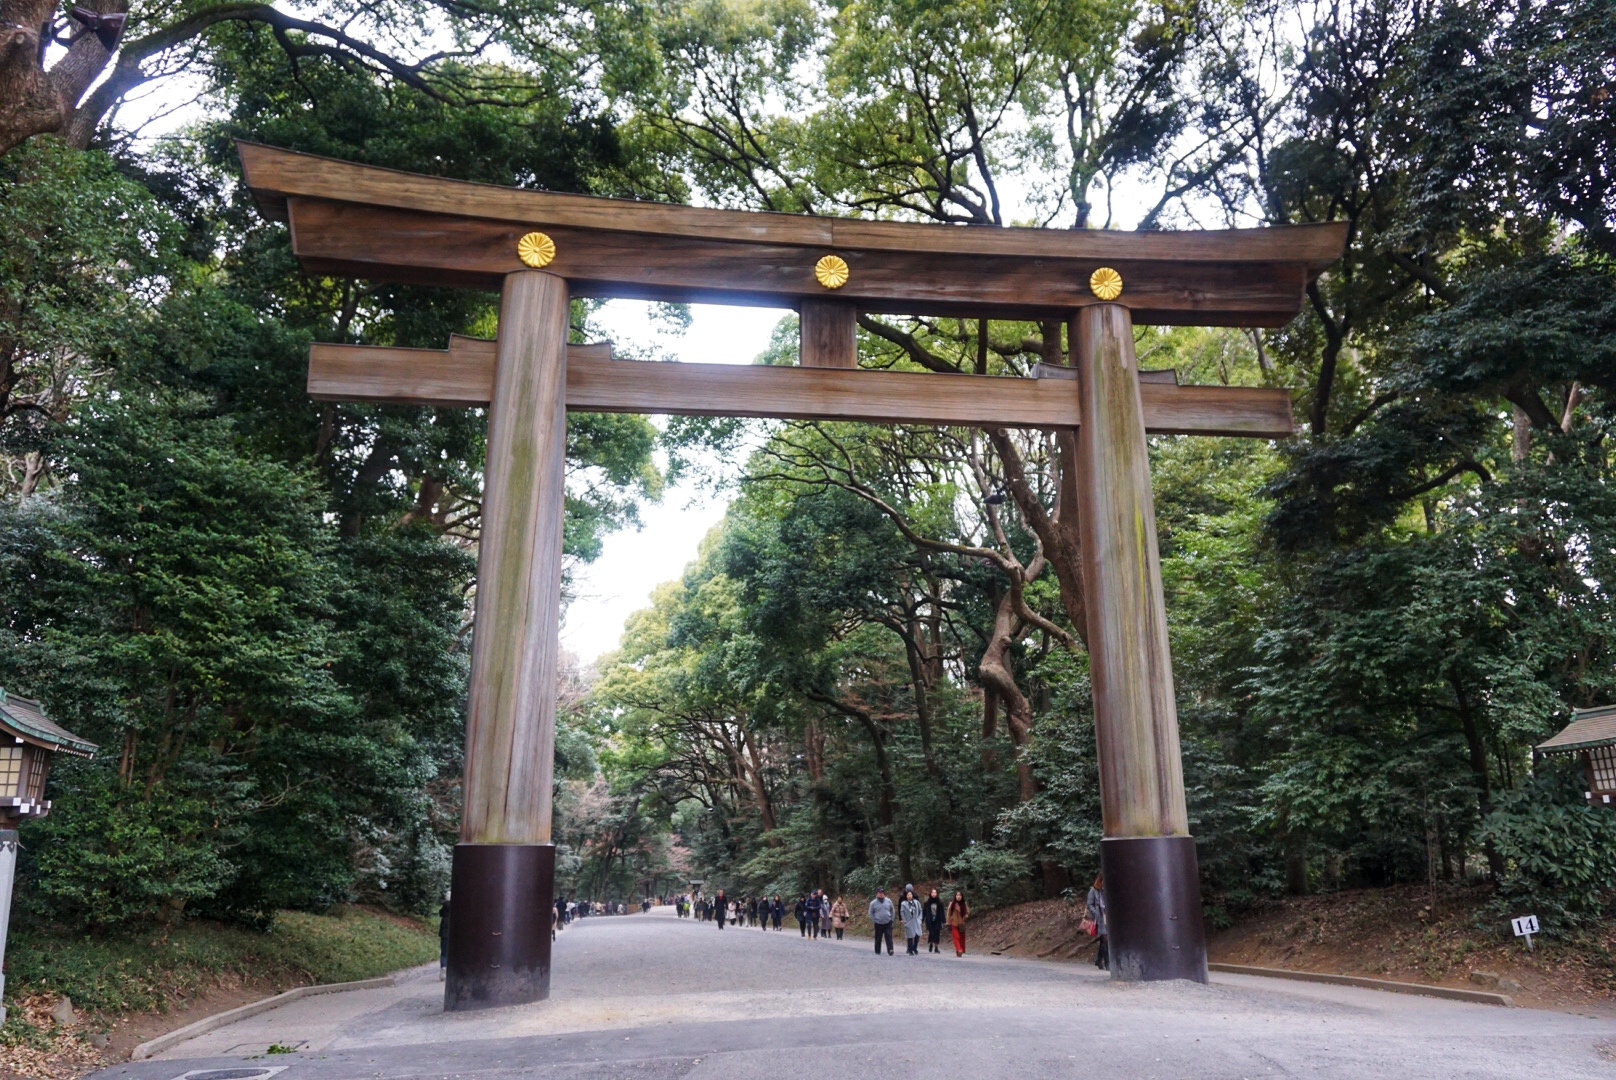 The Torii Gate at the Entrance